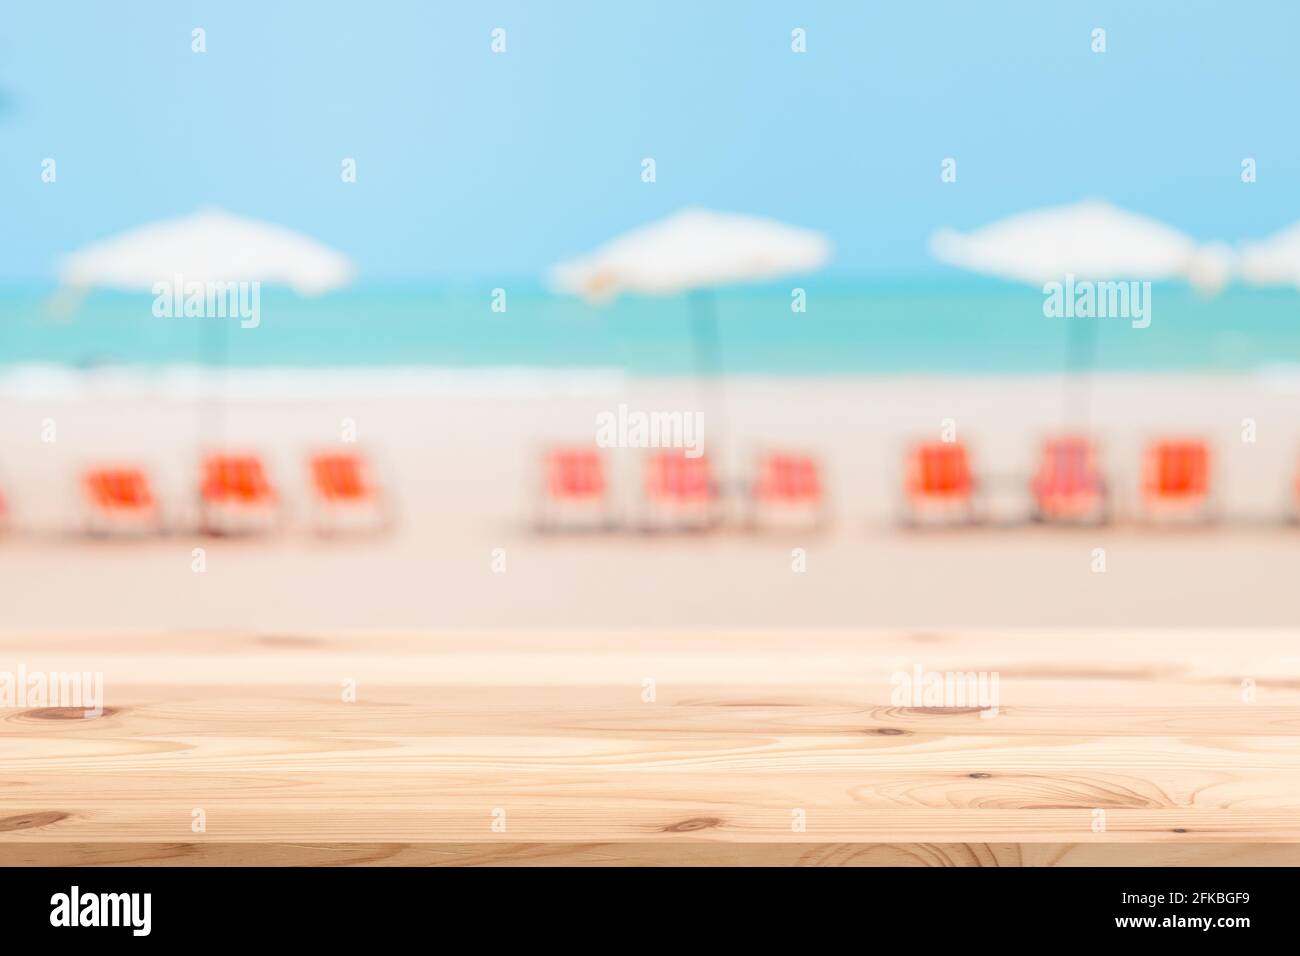 Summer beach chair umbrella blur with wooden table top for montage products background advertising space Stock Photo